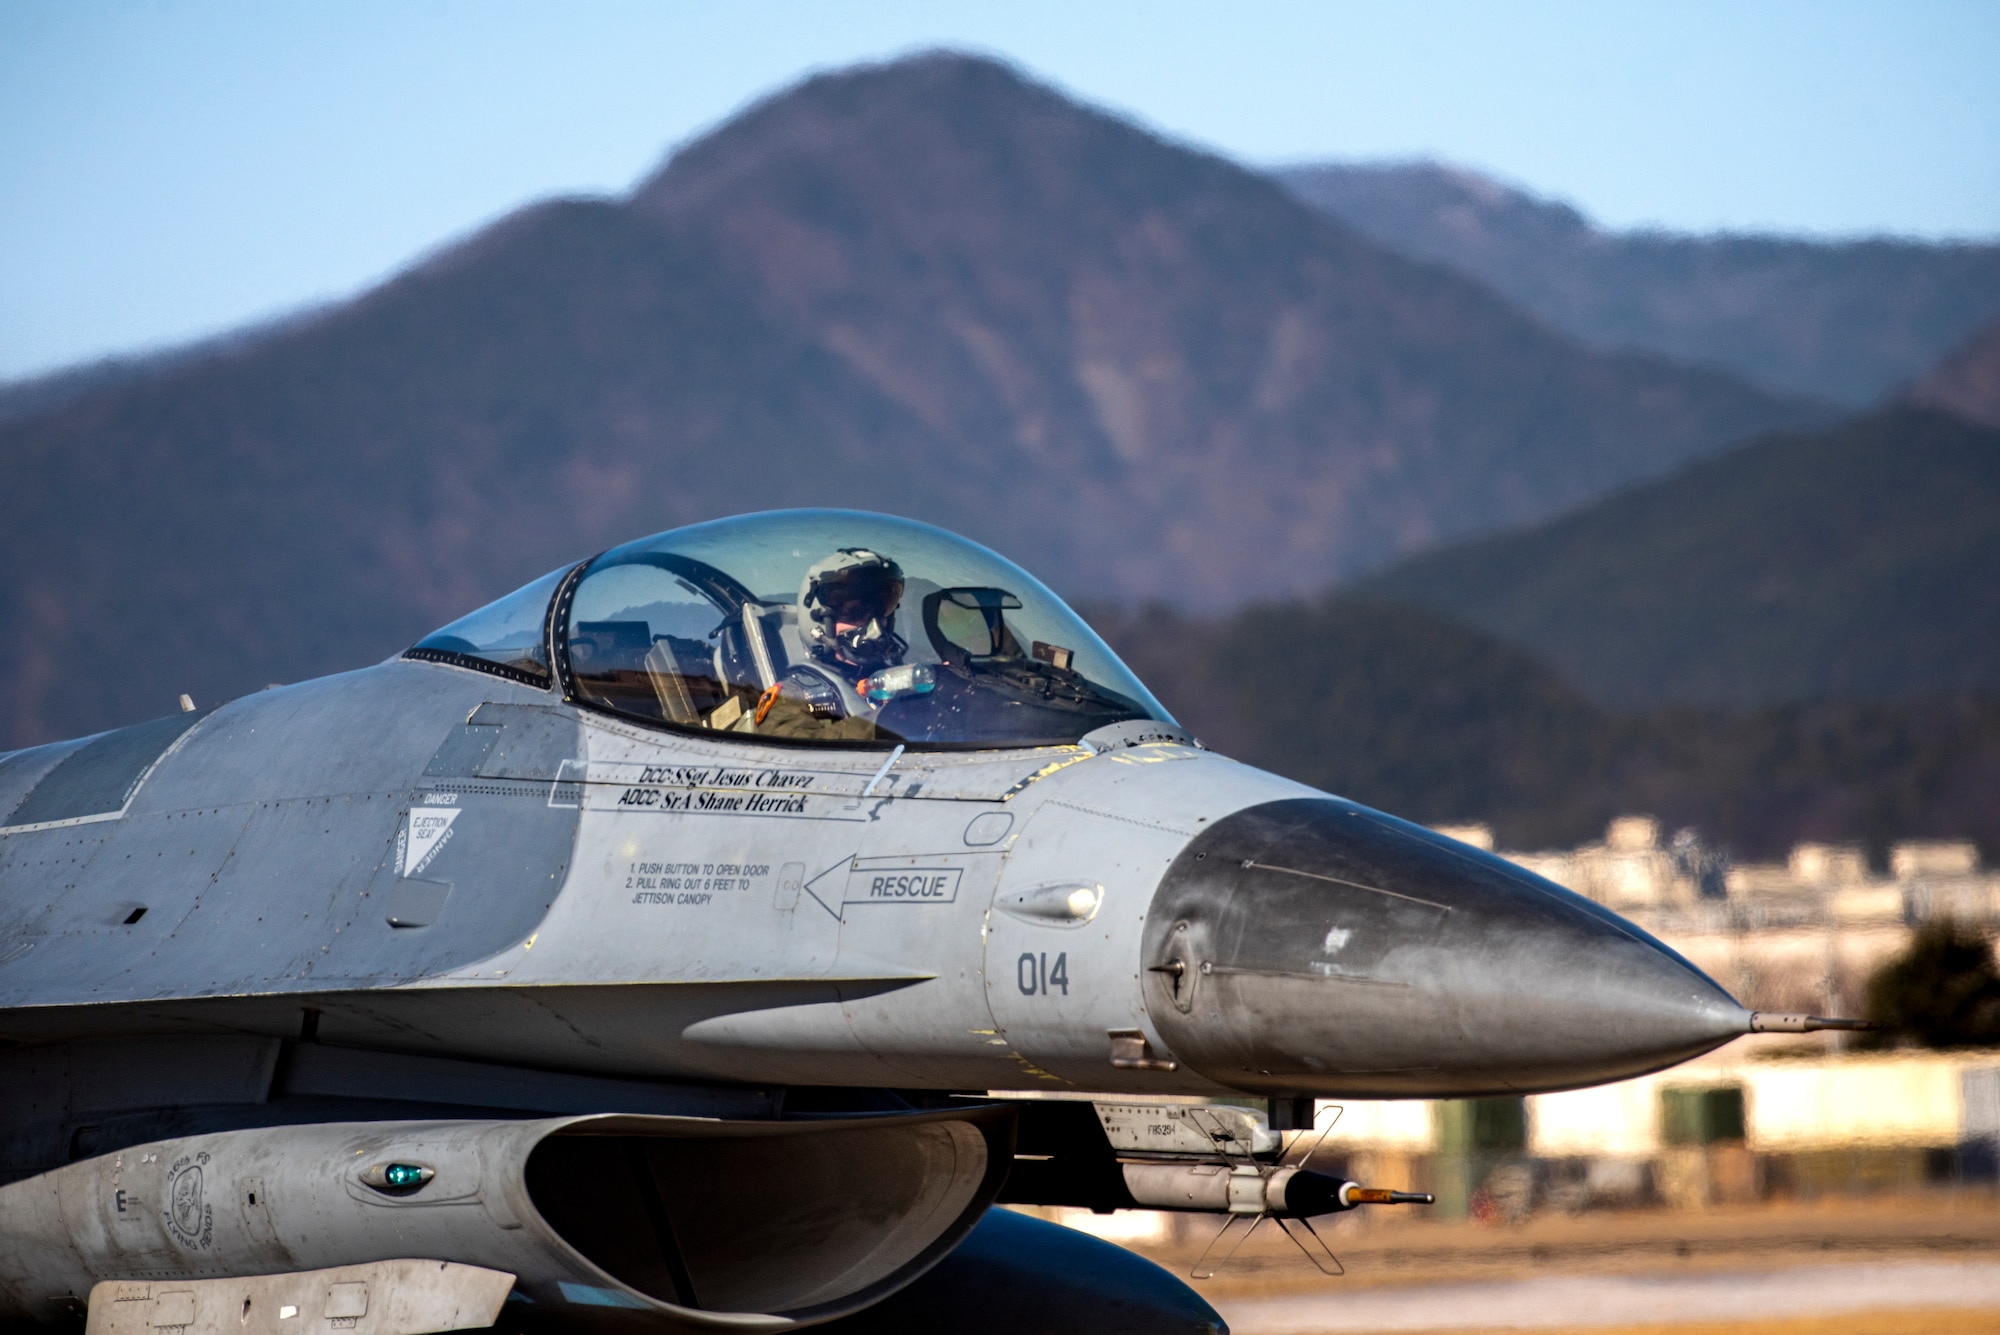 A U.S. Air Force F-16 Fighting Falcon, 36th Fighter Squadron, taxis on the runway after landing during a training event at Daegu Air Base, Republic of Korea, Jan. 30, 2023.